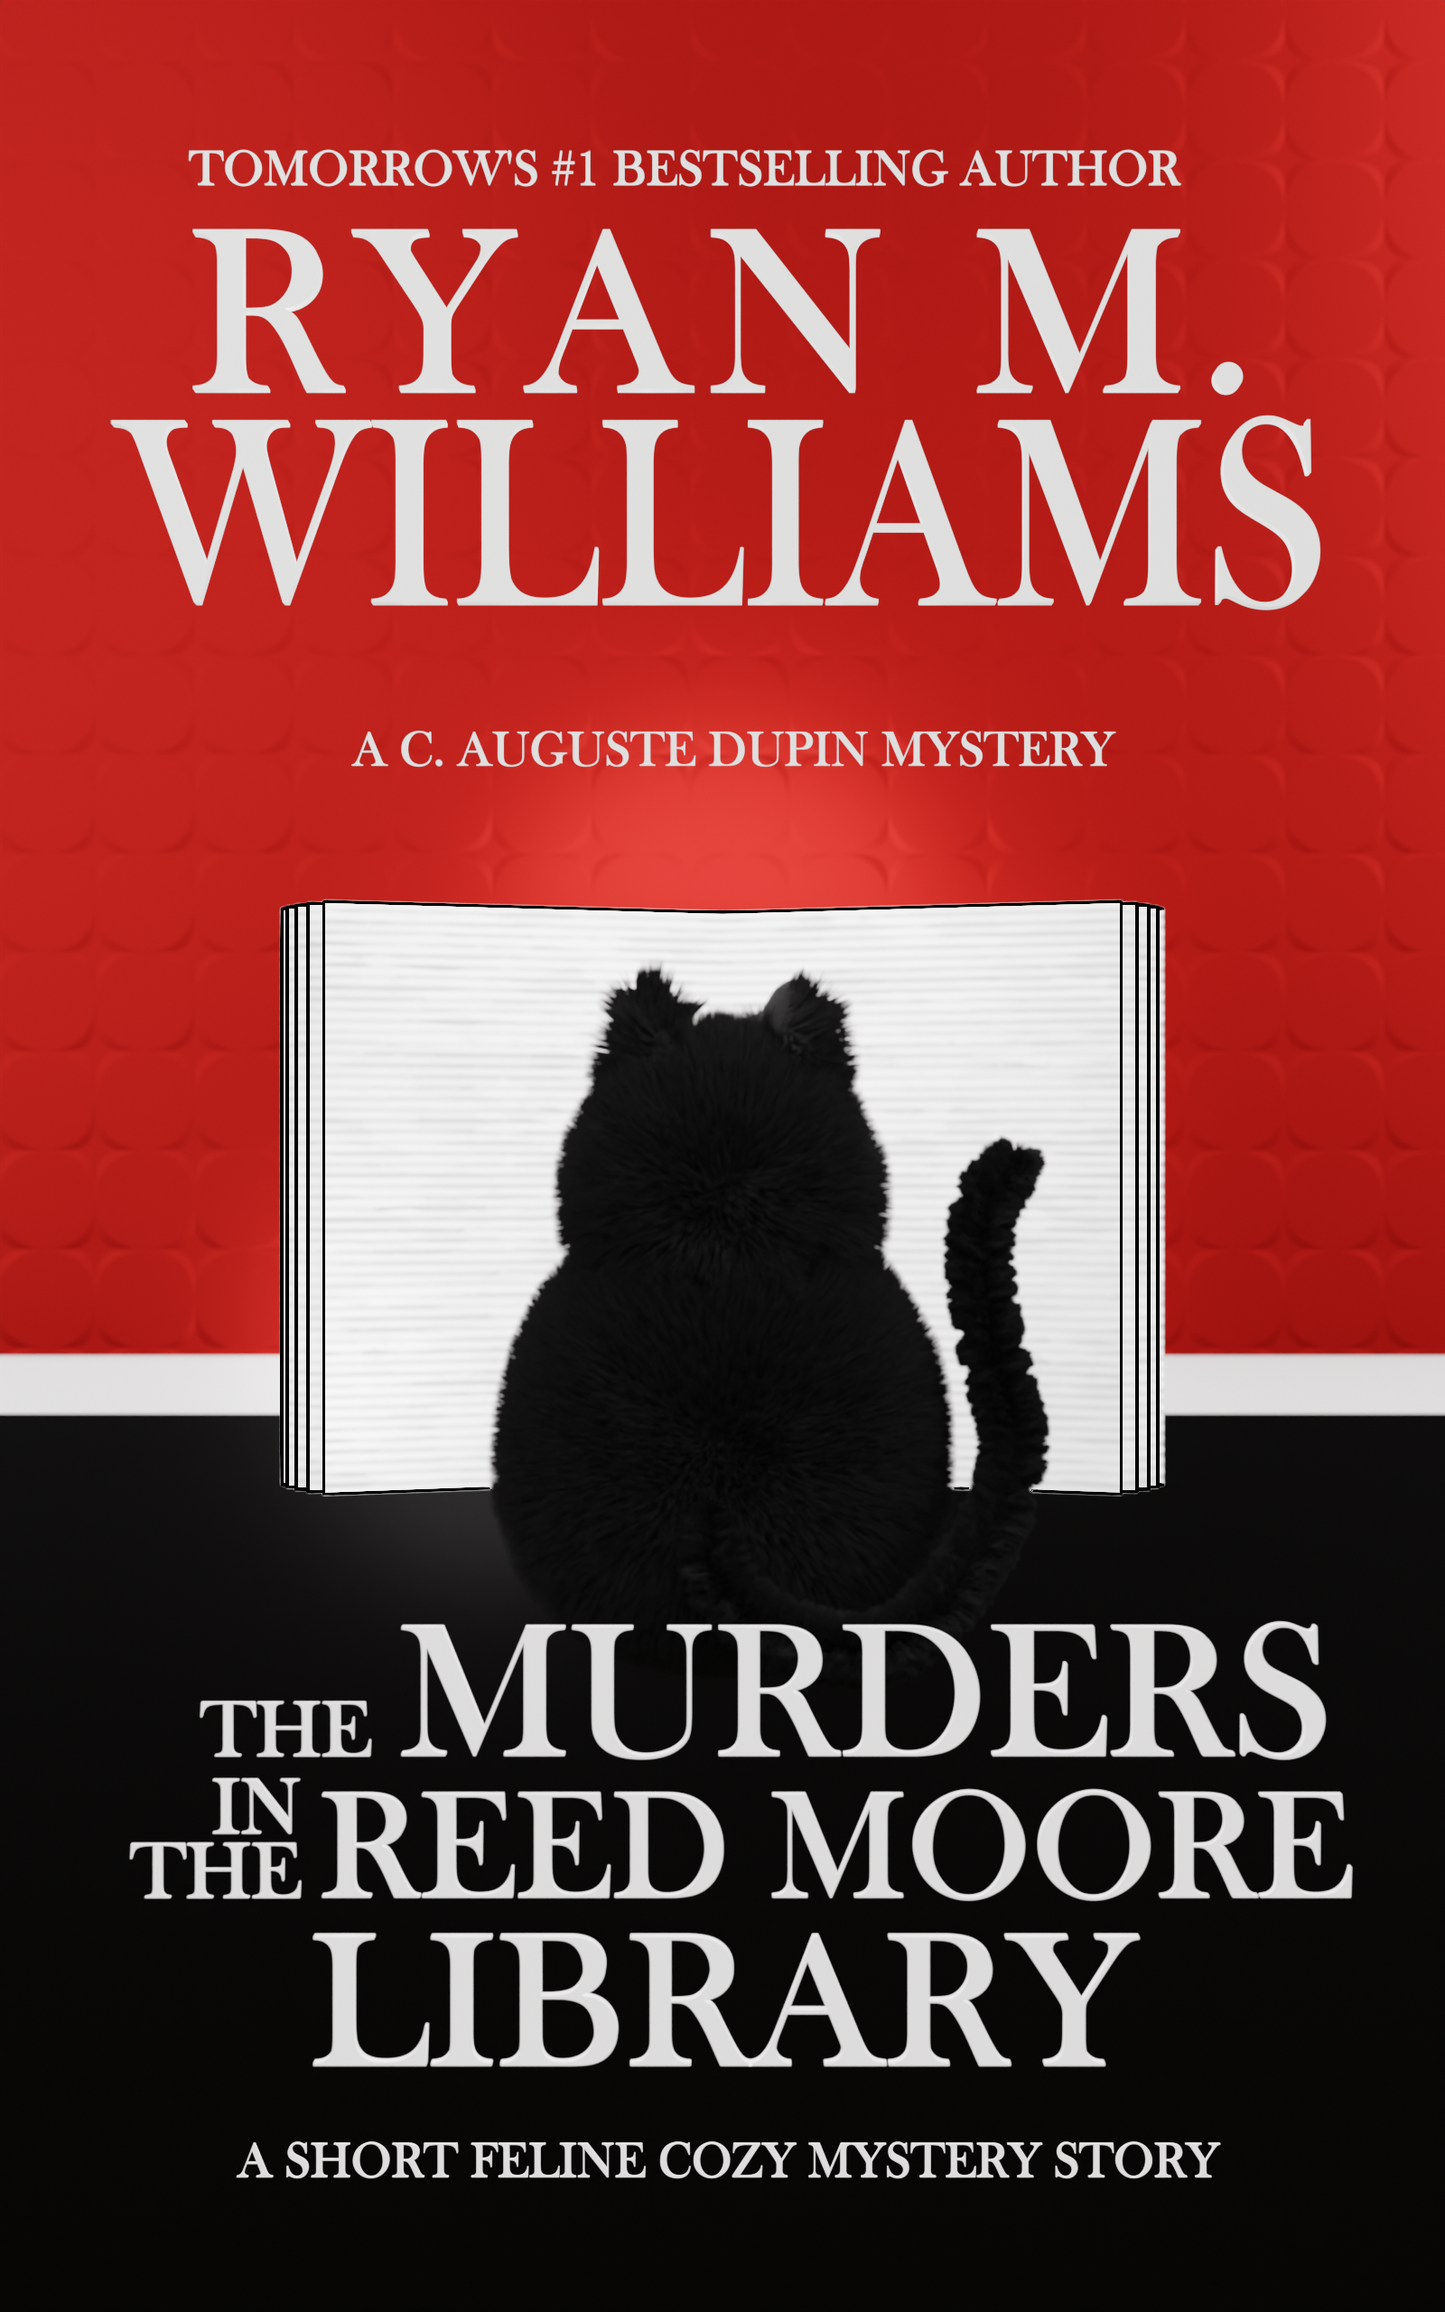 The Murders in the Reed Moore Library